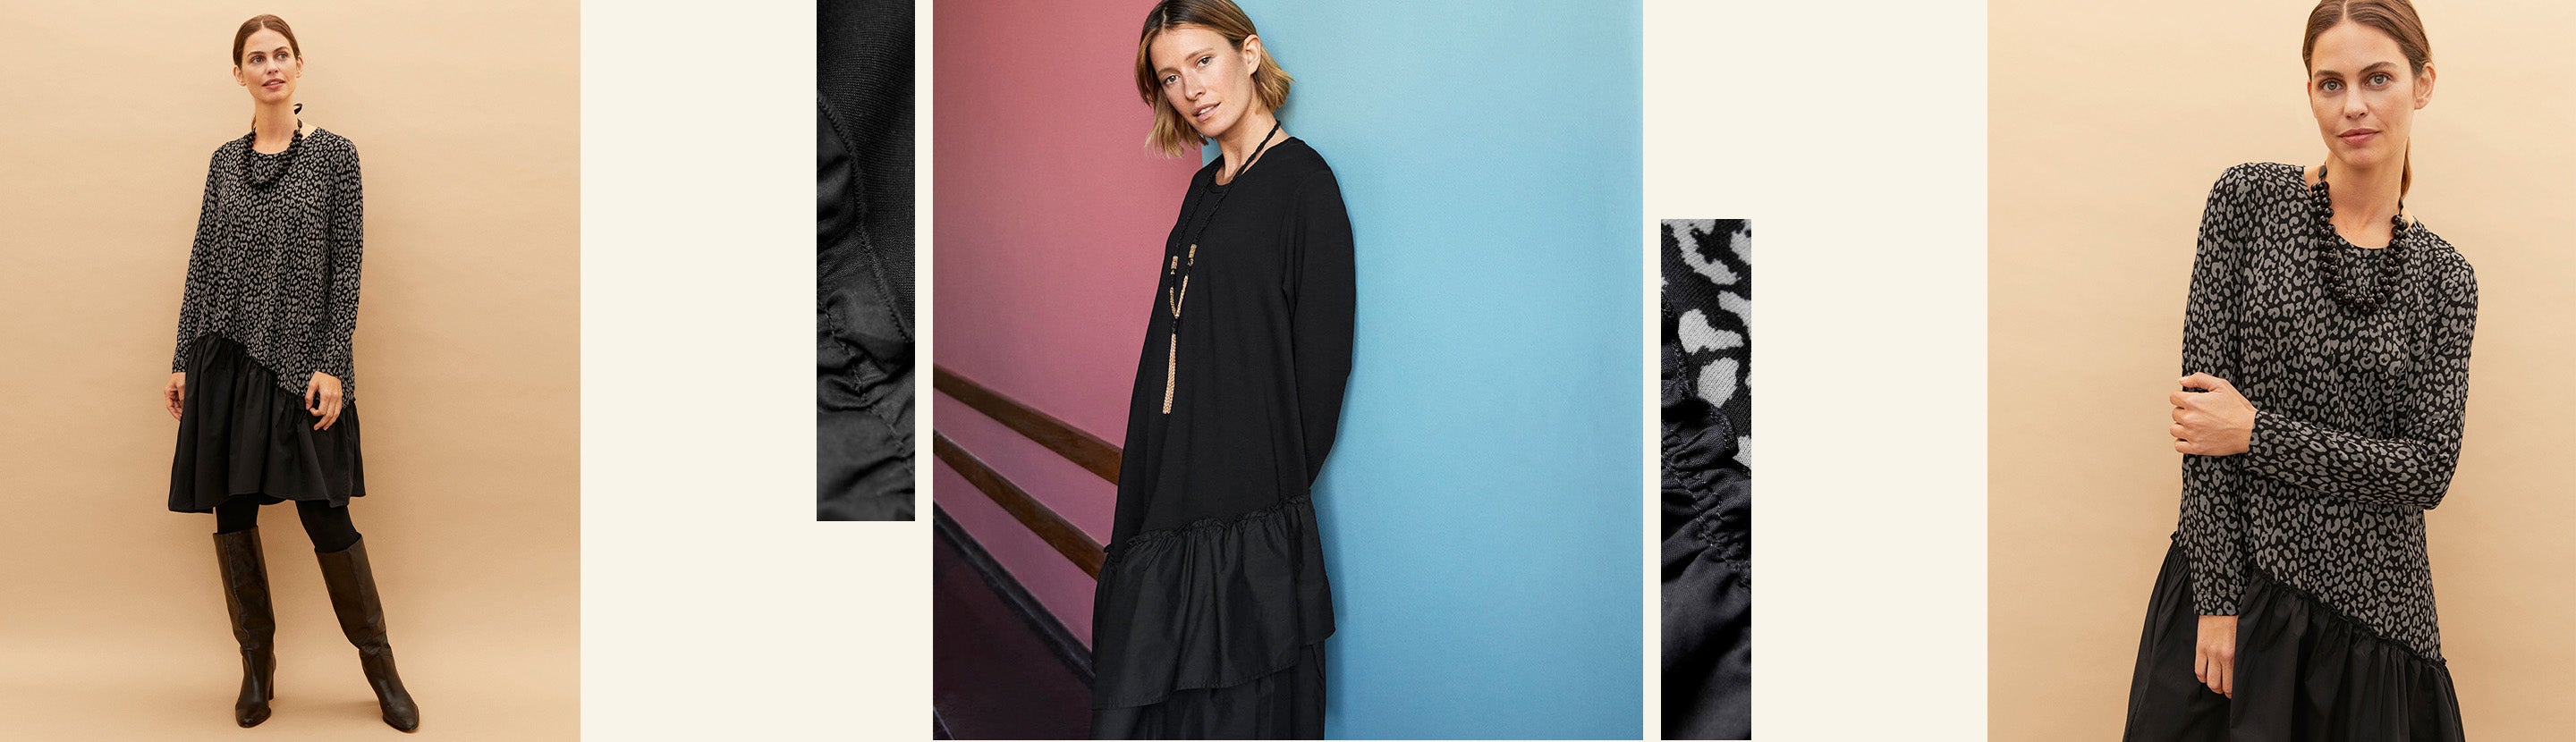 Styling Flowy Masai Copenhagen Dresses for Any Occasion